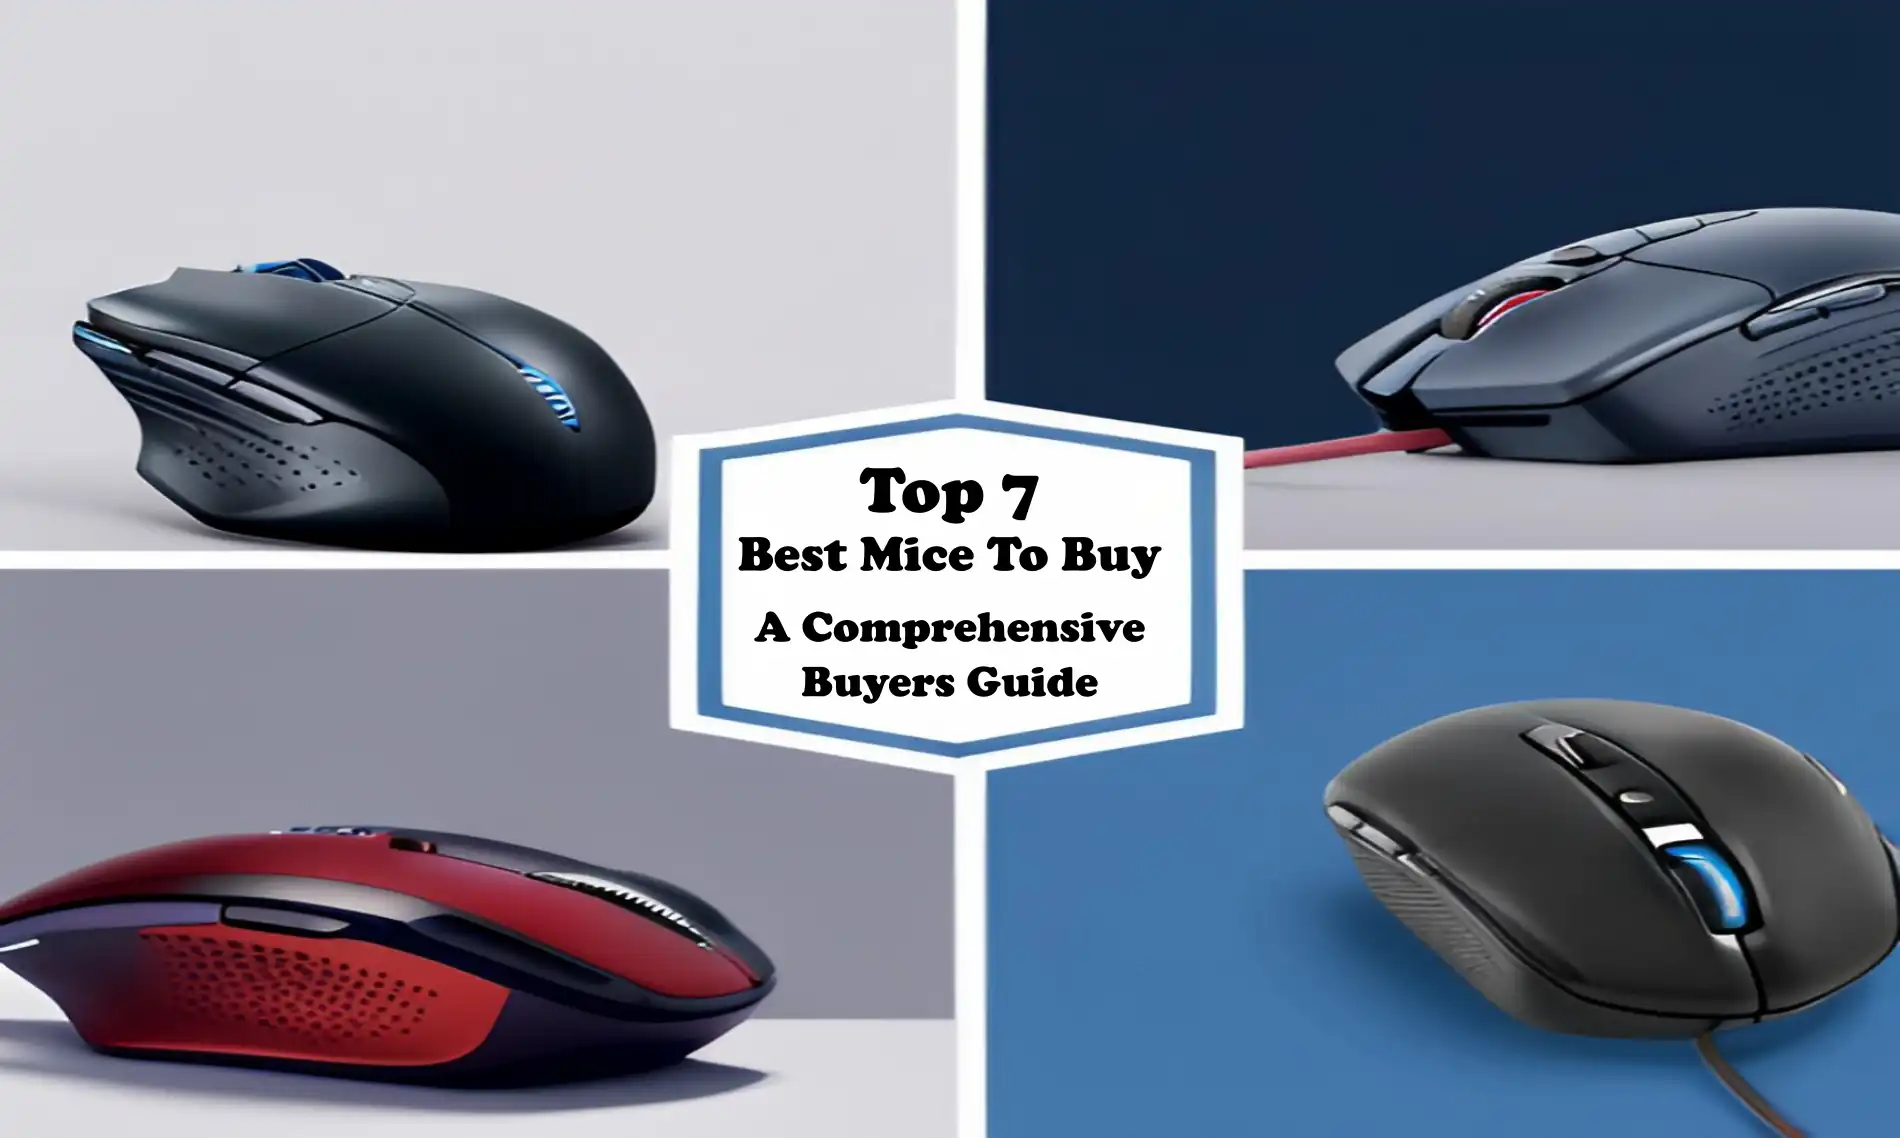 Top 7 Best Mice To Buy, A Comprehensive Buyers Guide